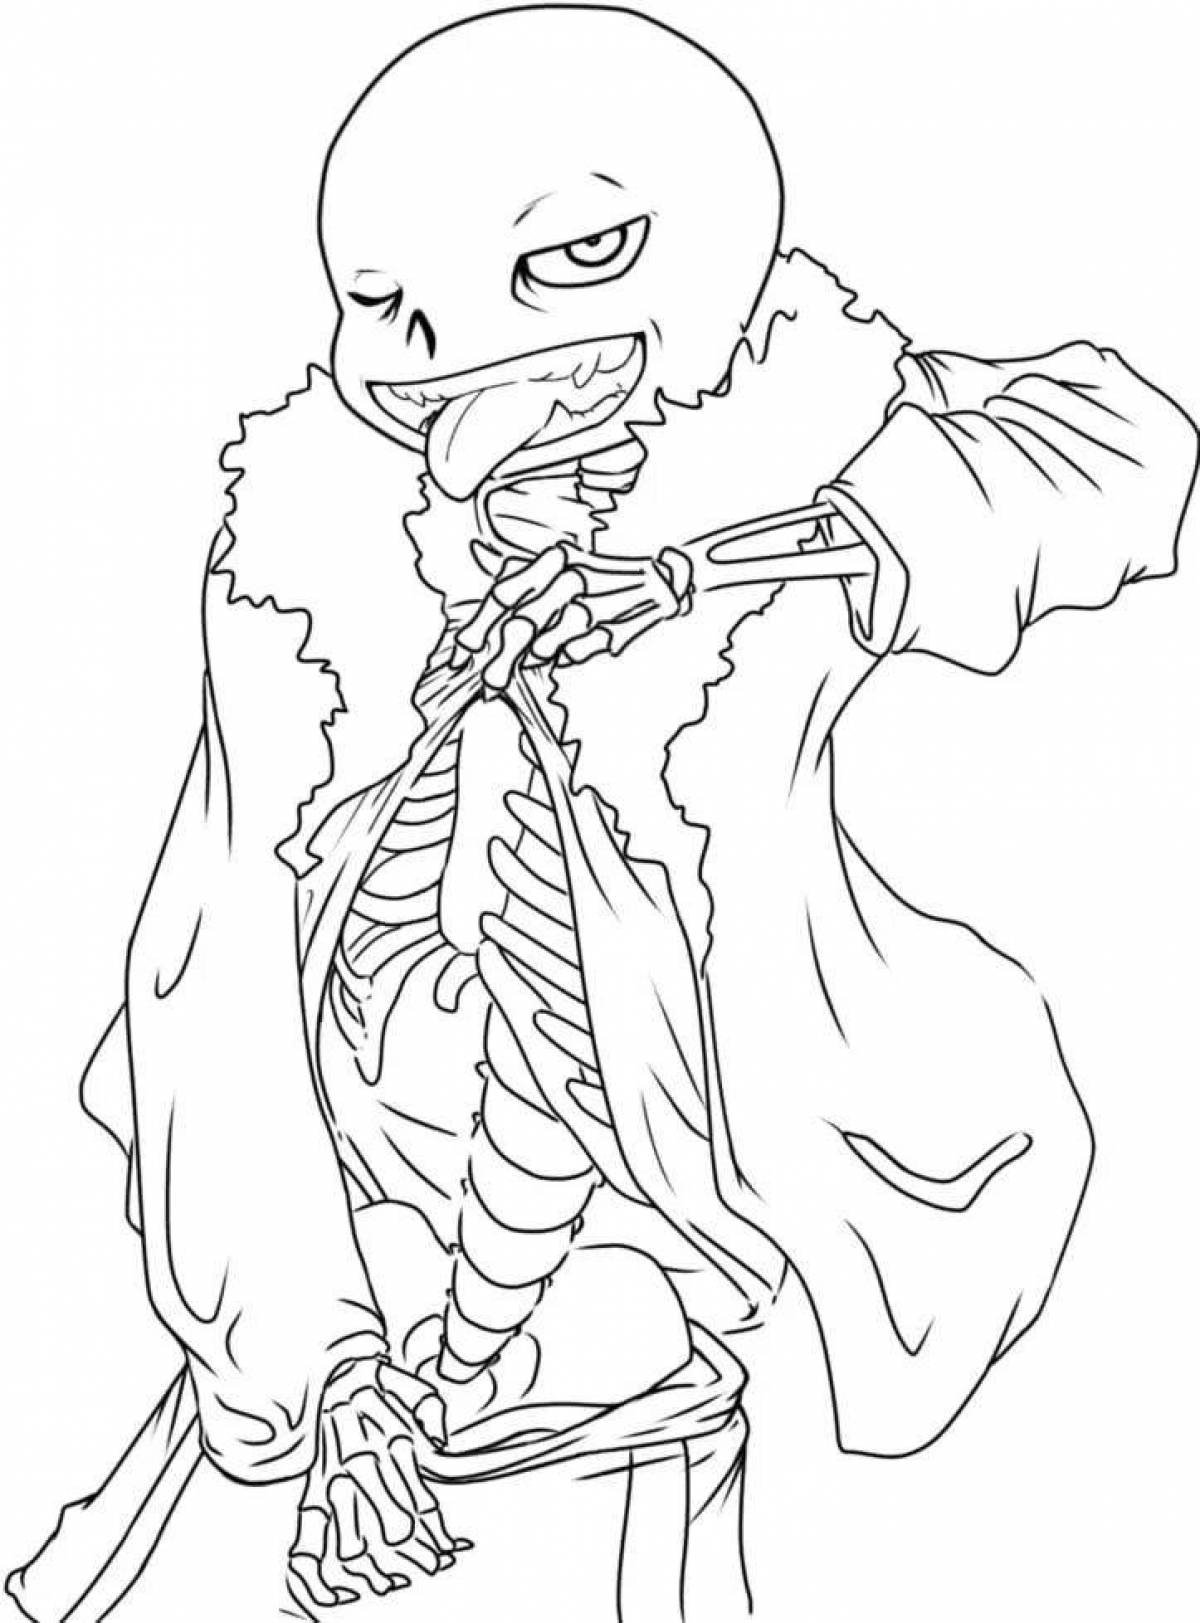 Amazing ink sans coloring page